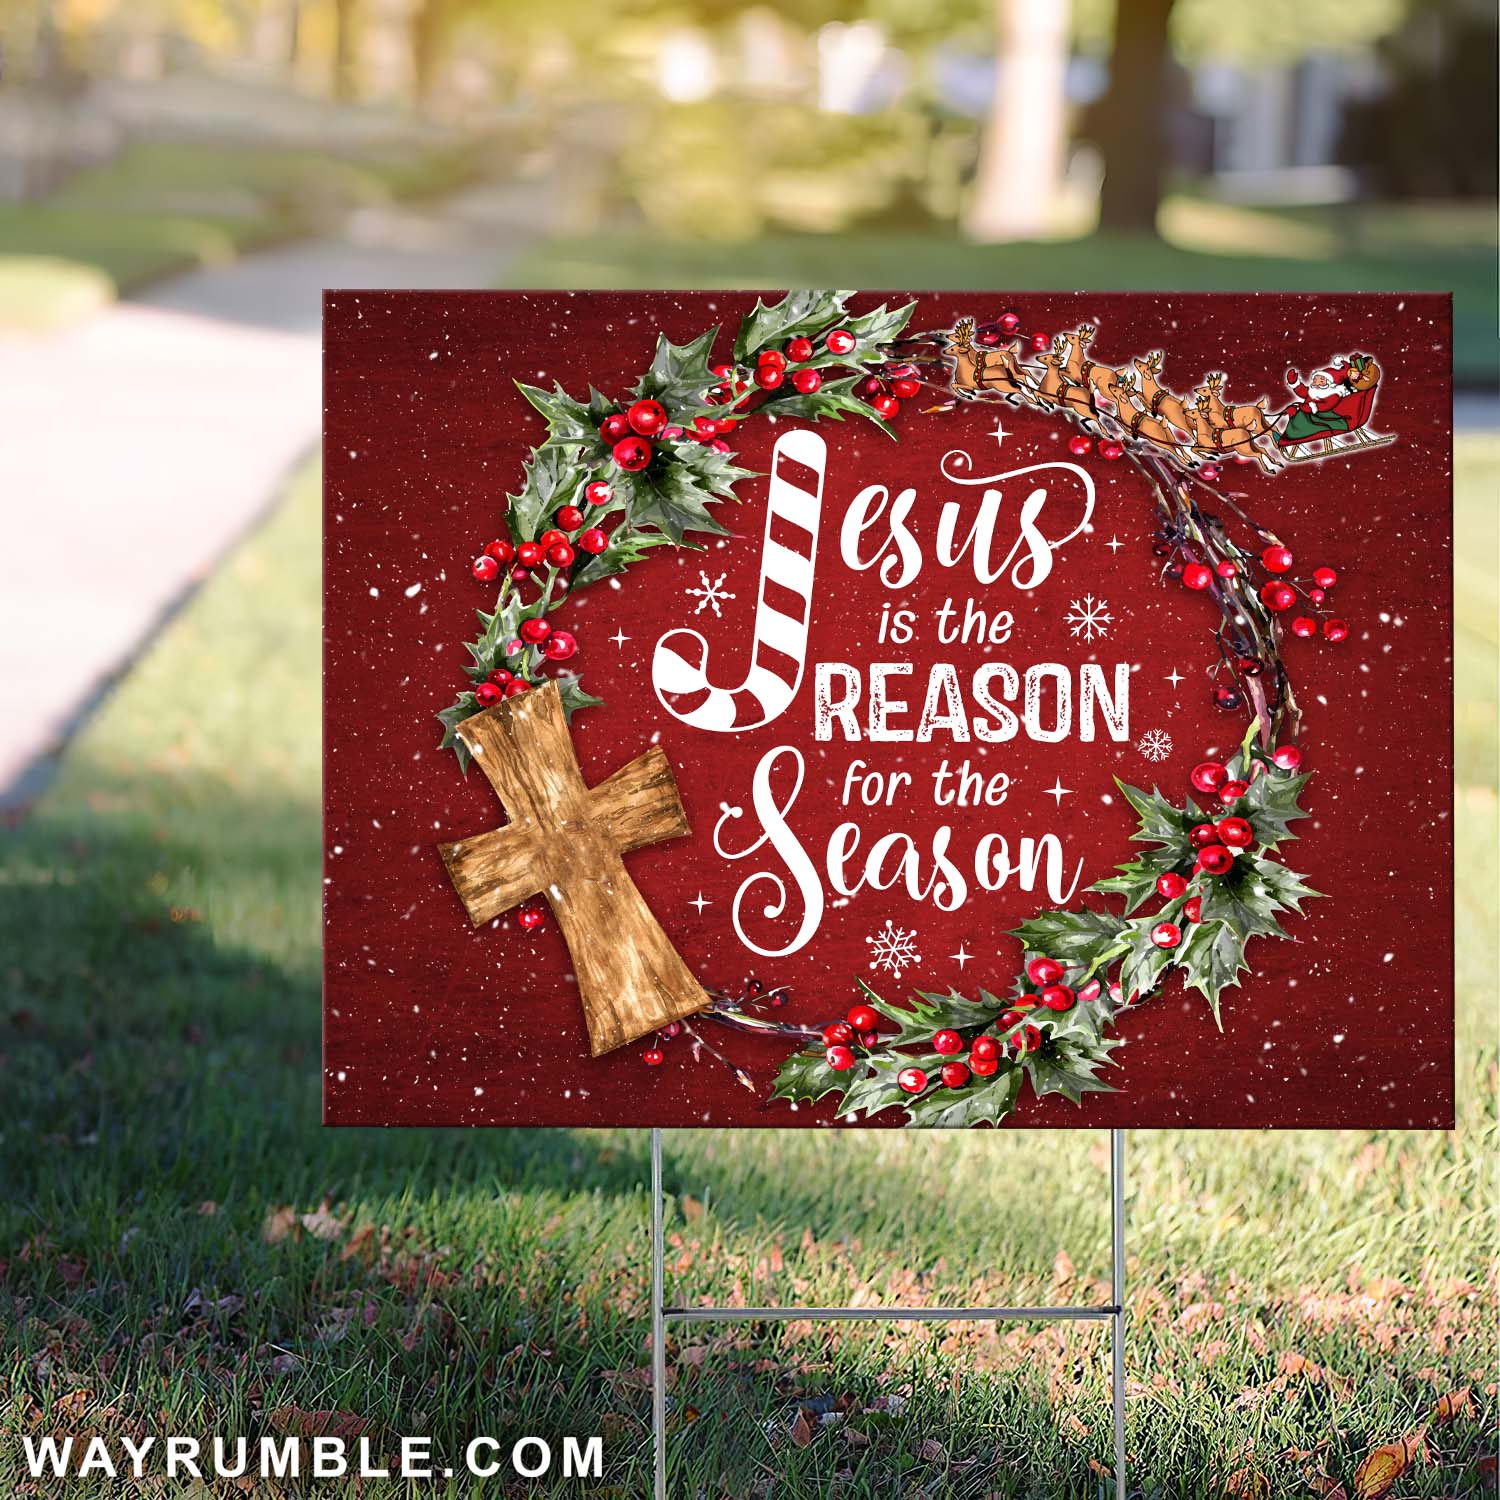 Christmas gift, Santa Claus, Candy cane, Jesus is the reason for the season - Jesus, Christmas Yard Sign